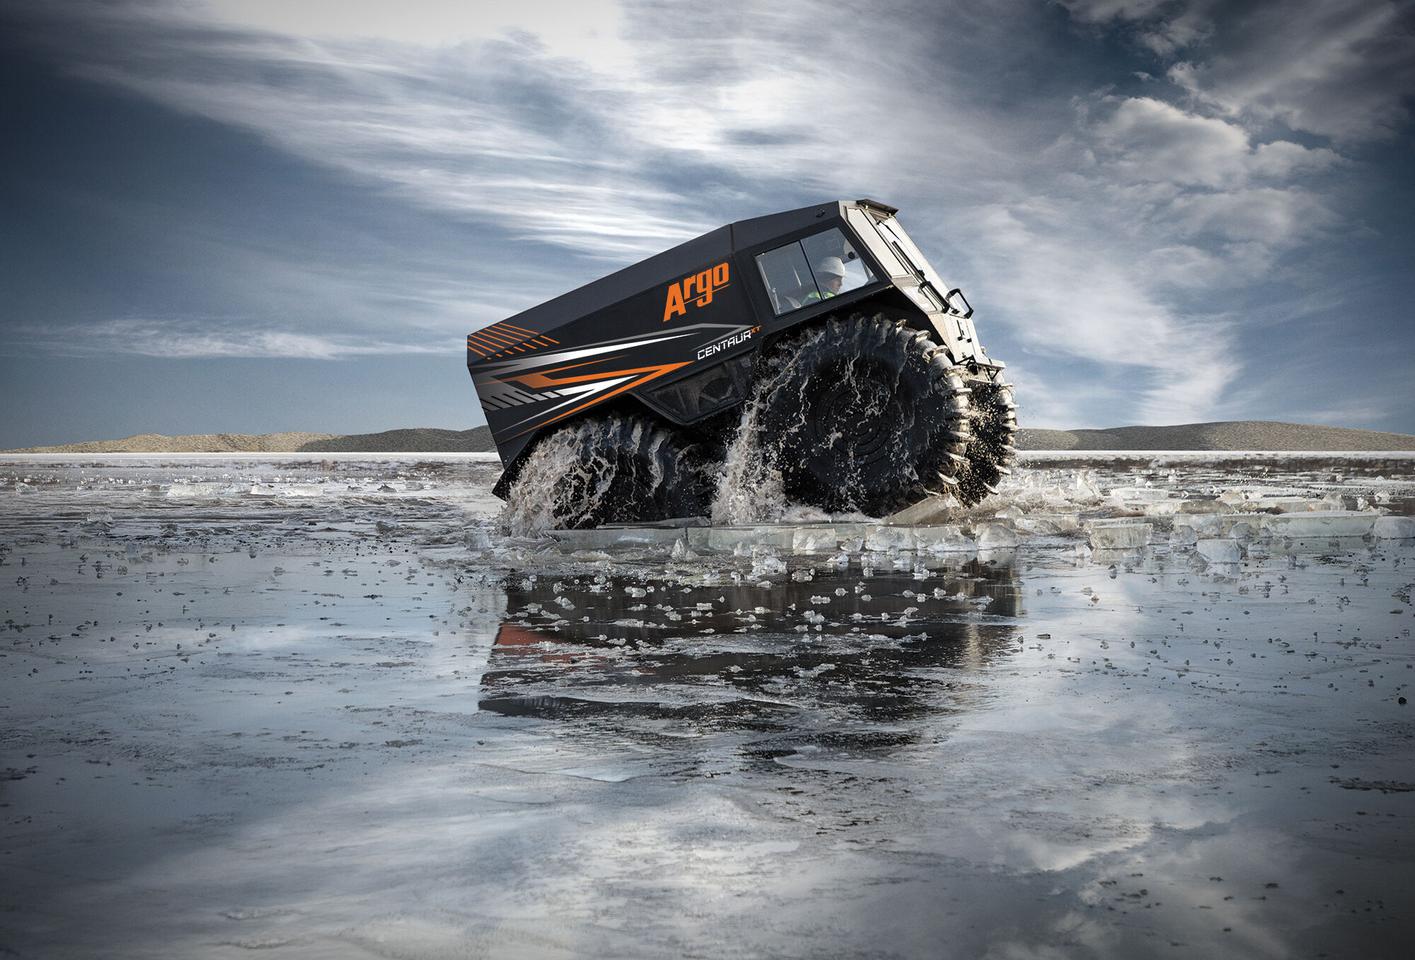 ARGO Sasquatch pickup aims to be king of amphibious off-road vehicles